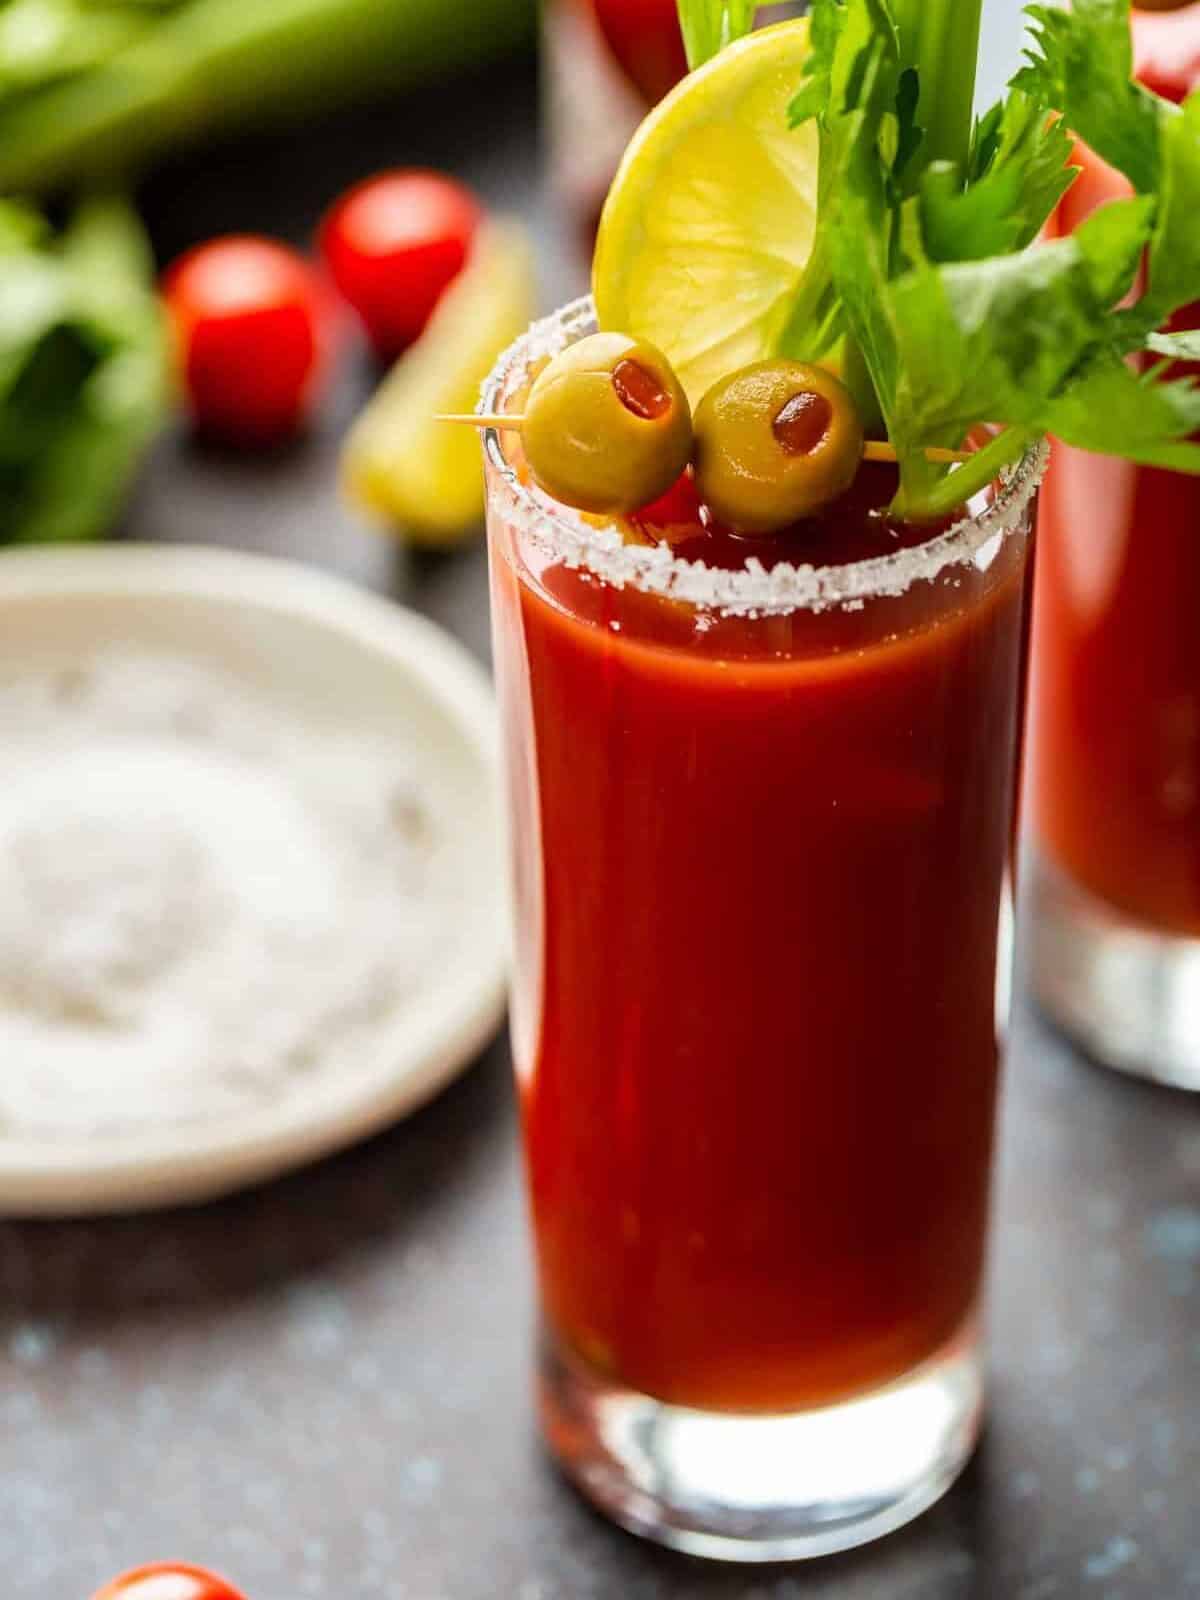 Bloody Mary garnished with olives and celery